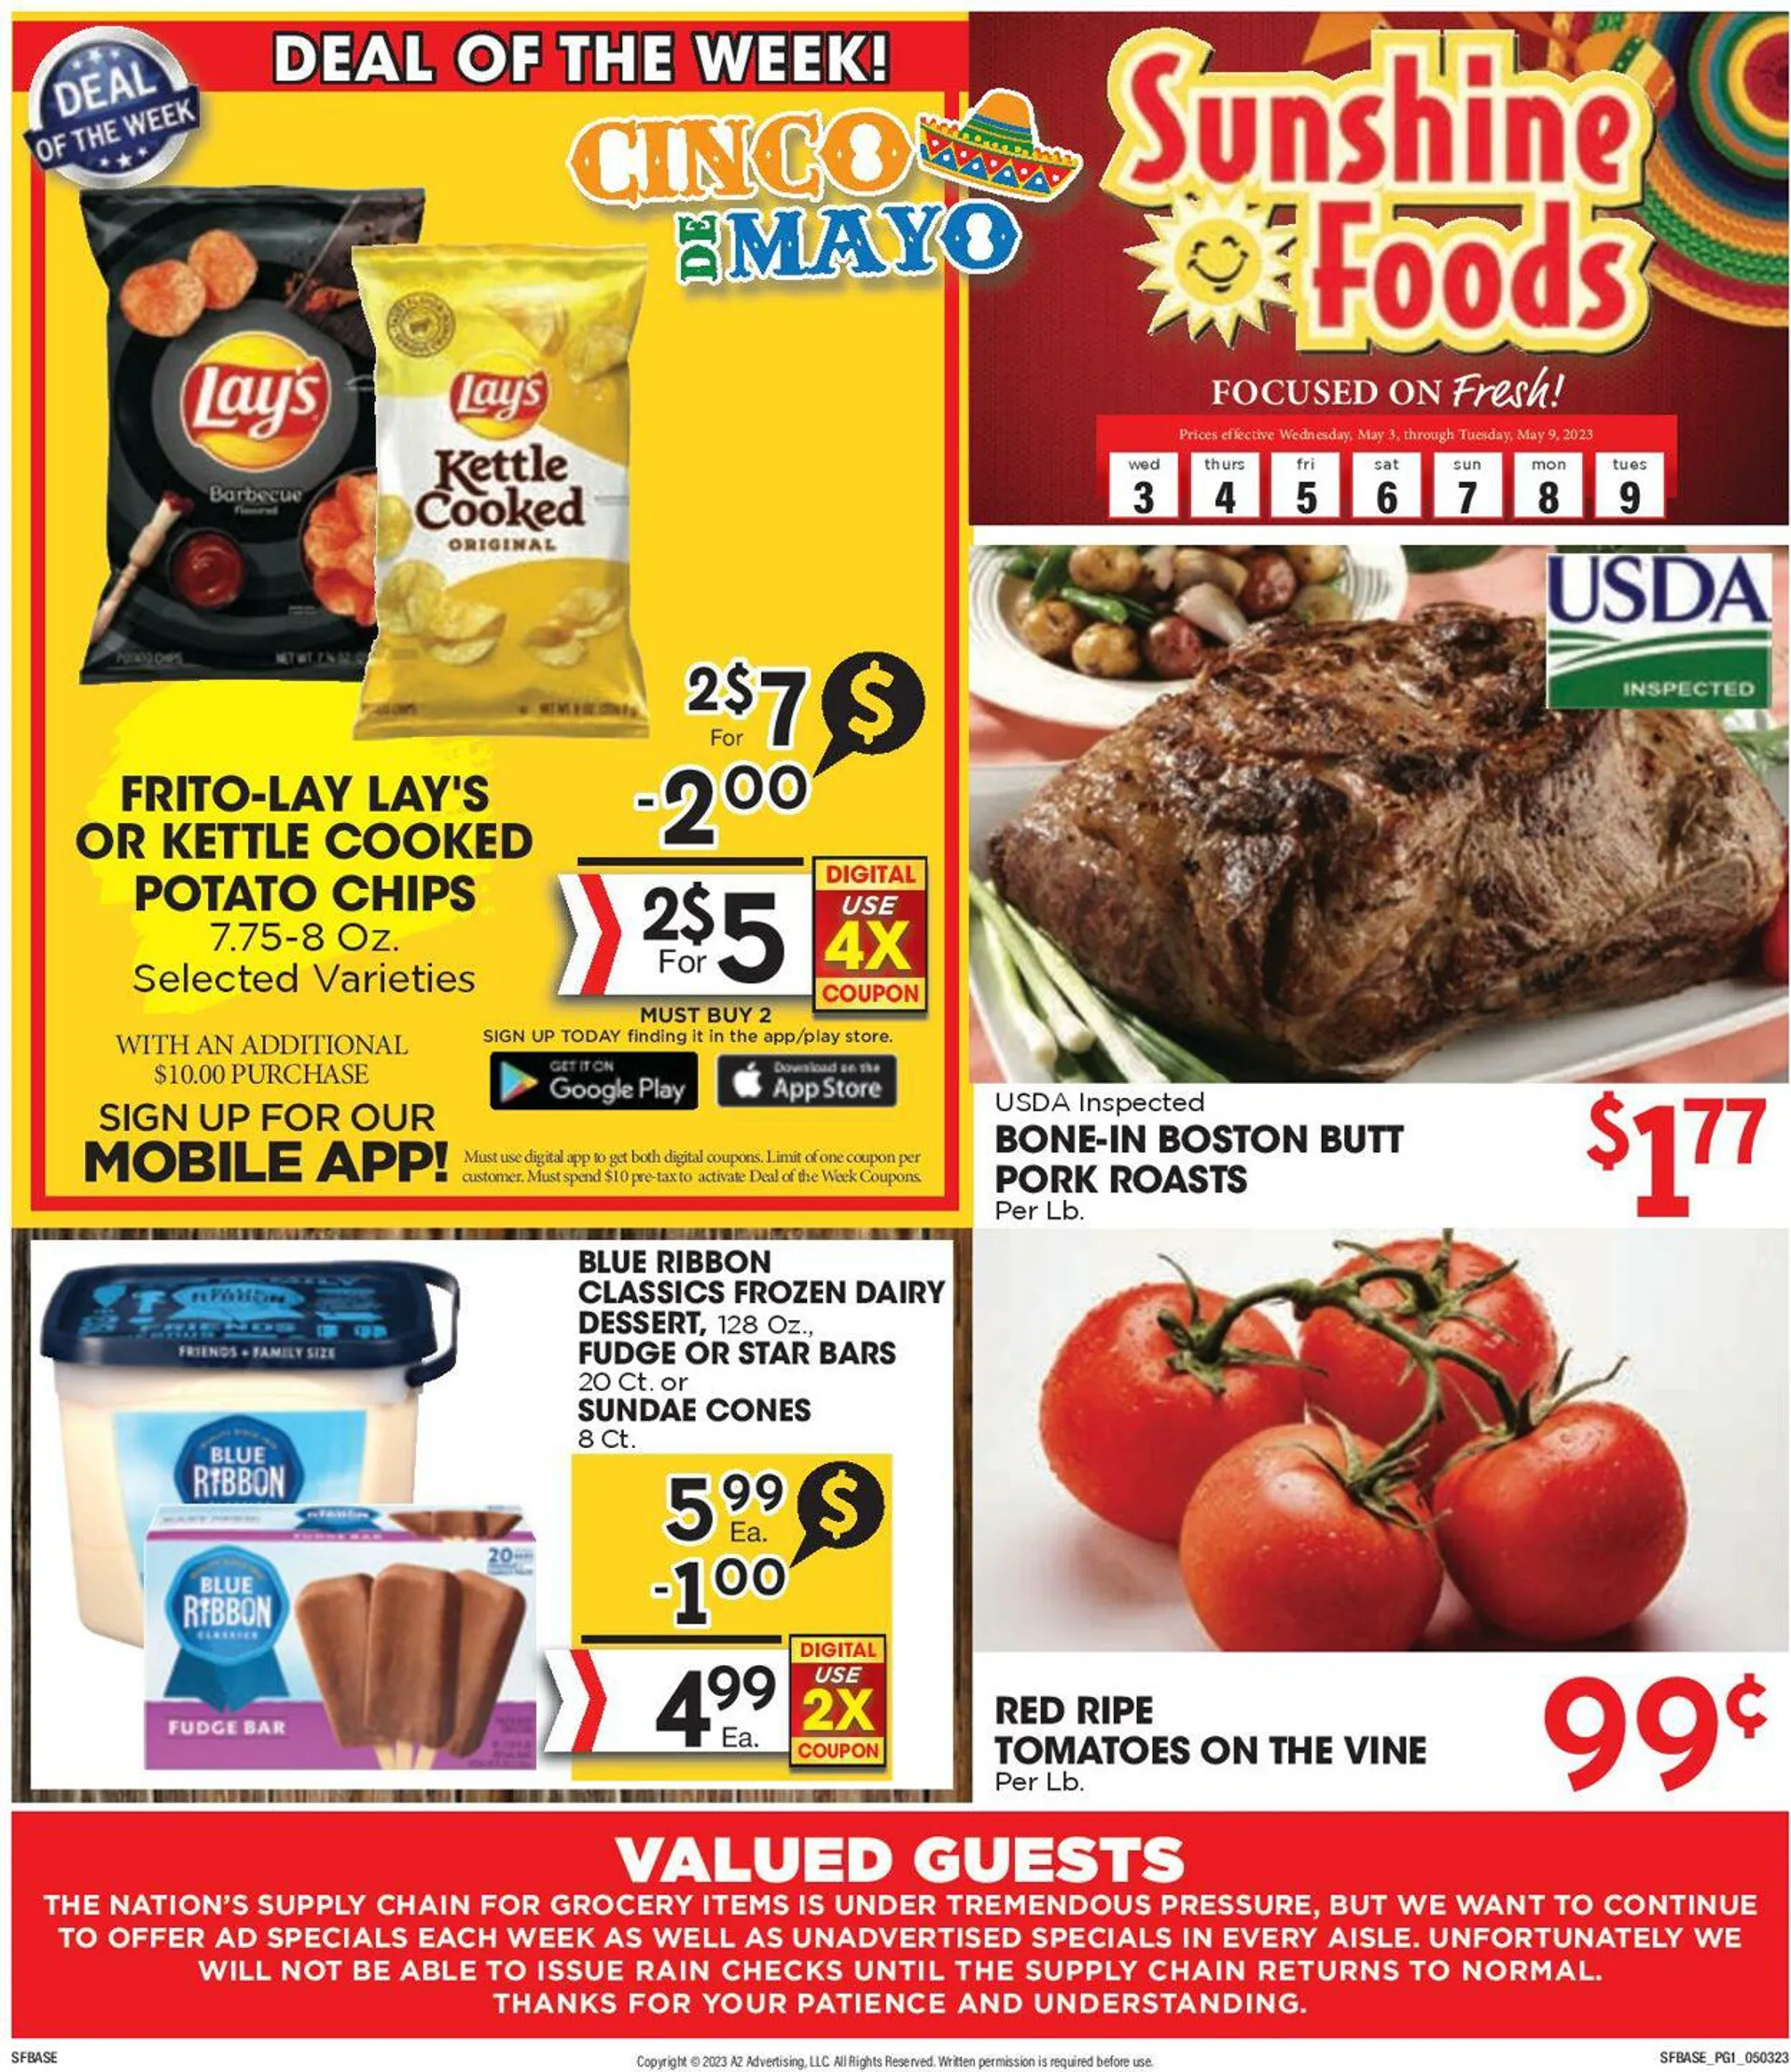 Sunshine Foods Current weekly ad - 1